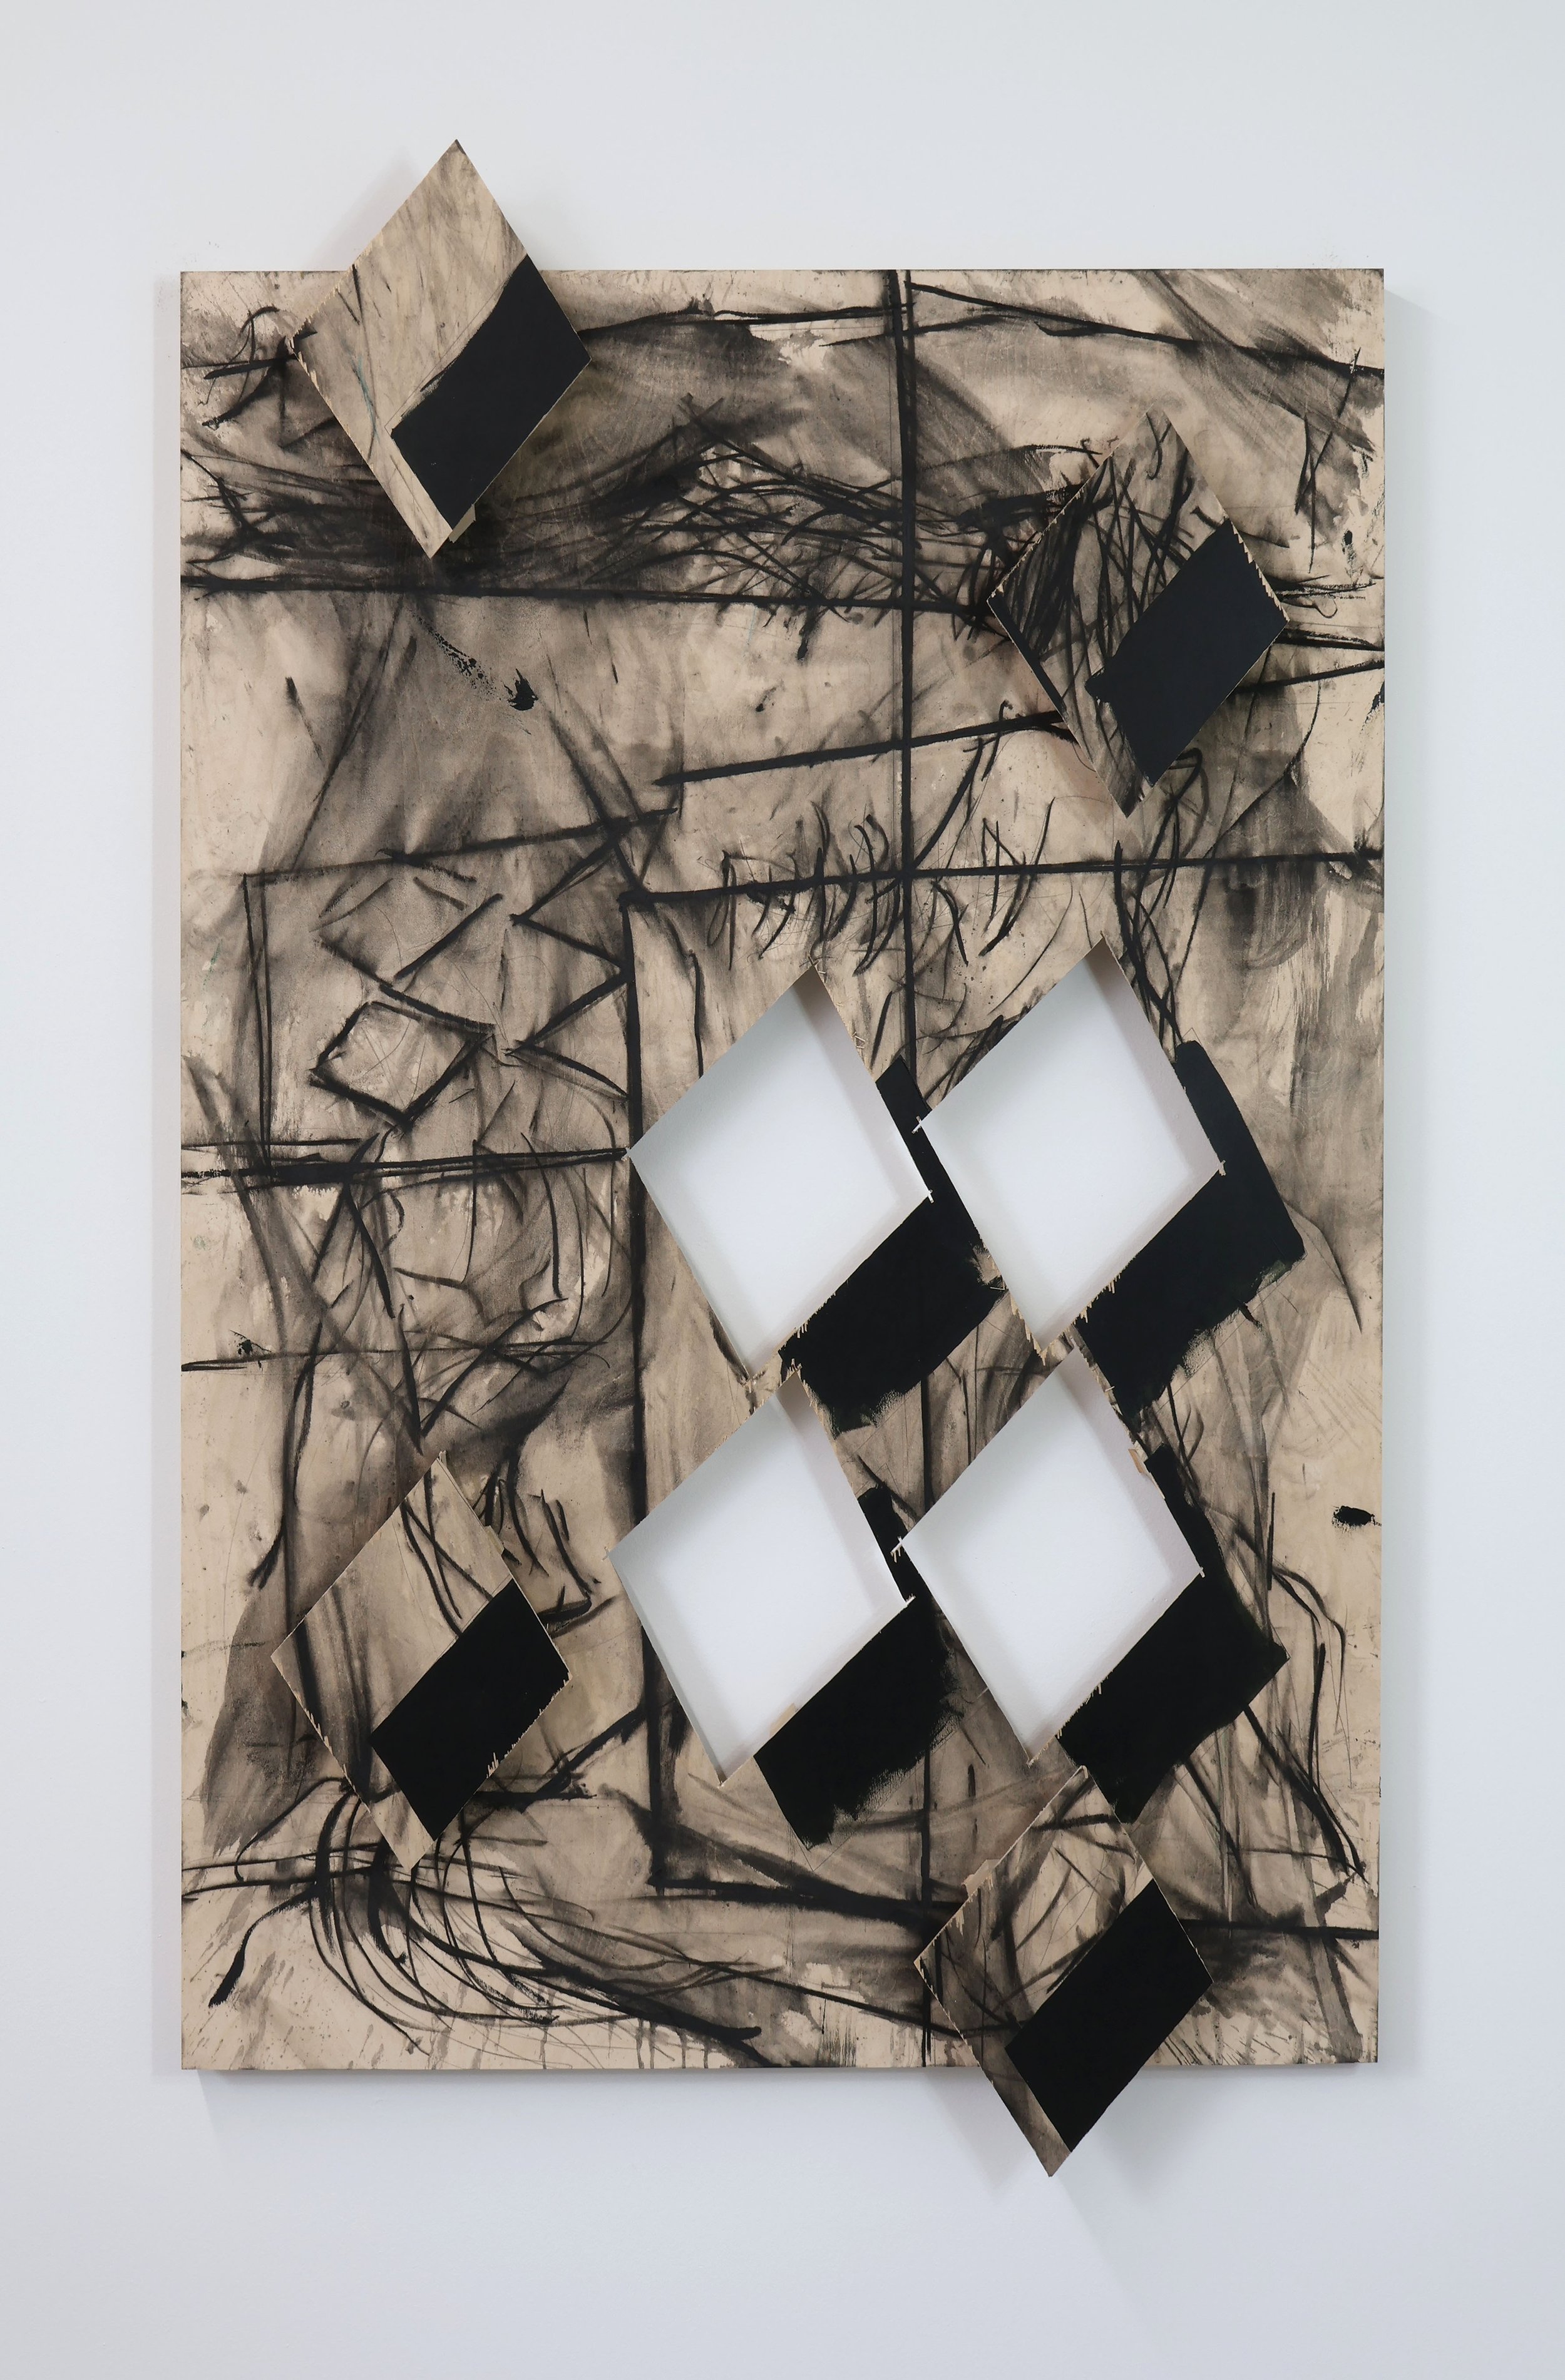  Untitled  Acrylic, charcoal, graphite pencil on wood panel.   67 x 40 x 2 in.  2022 